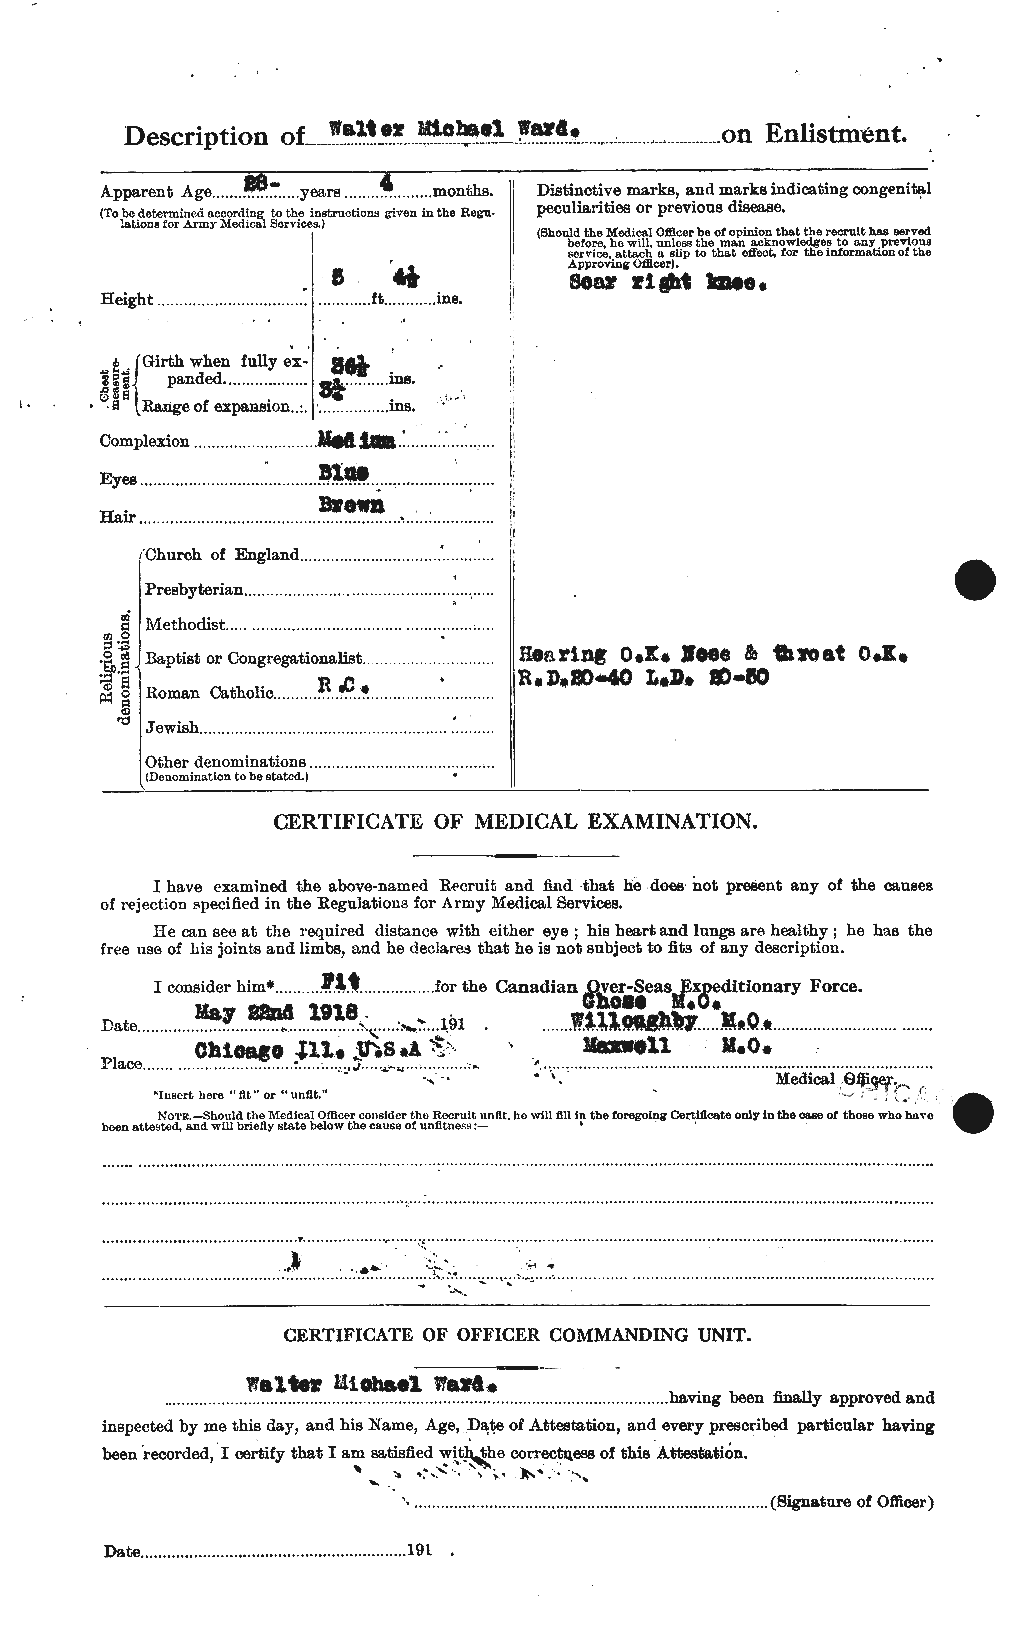 Personnel Records of the First World War - CEF 659759b